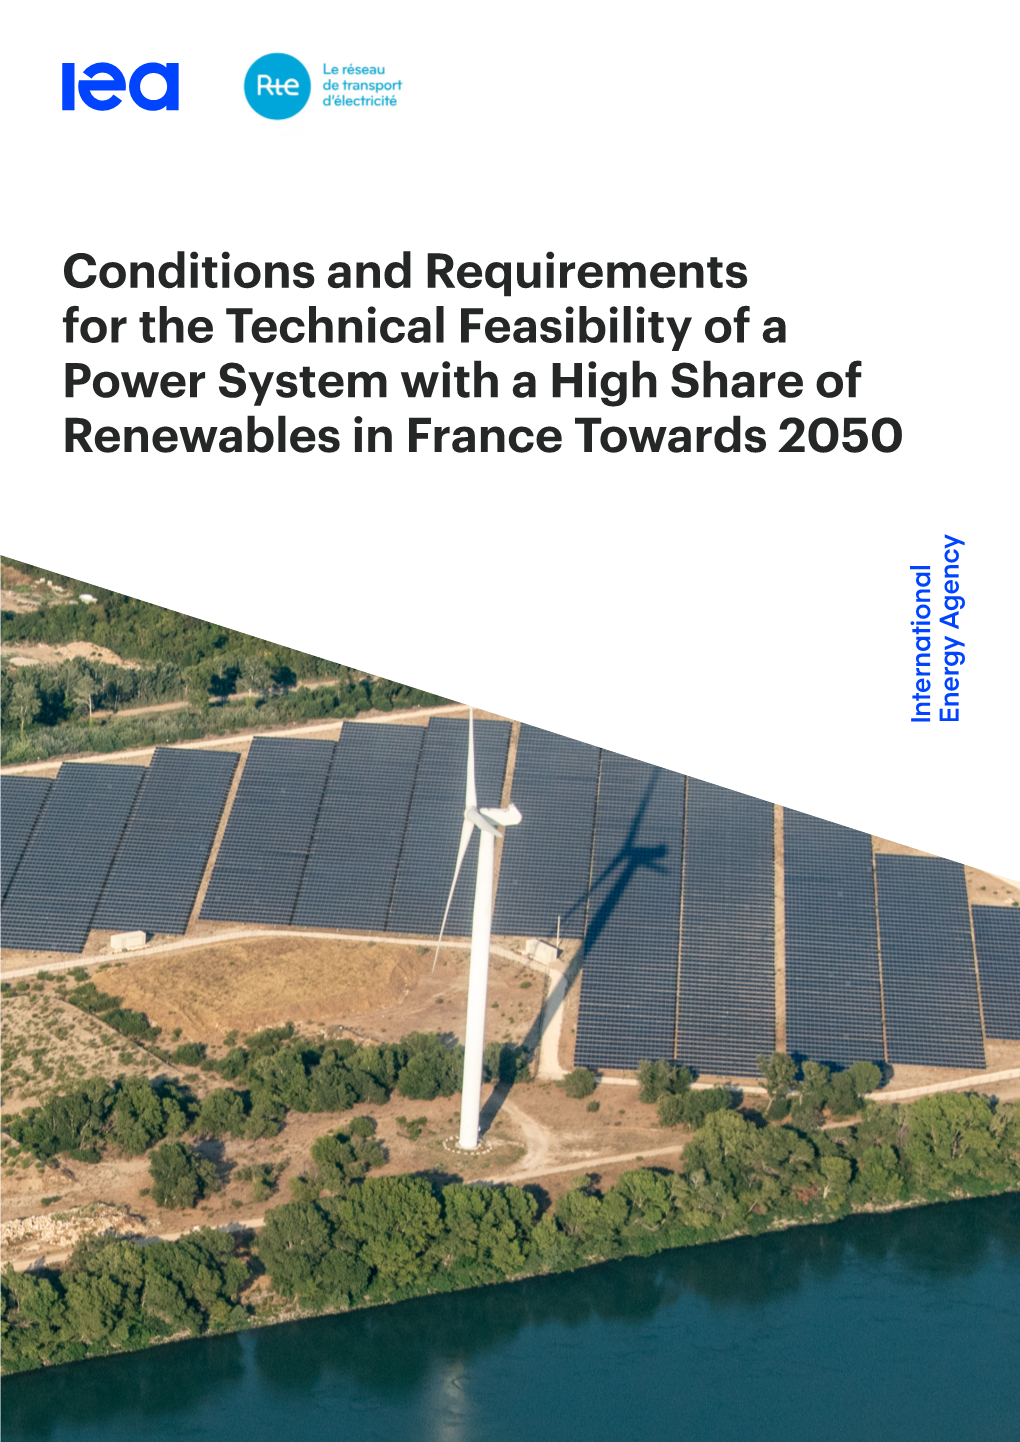 Conditions and Requirements for the Technical Feasibility of a Power System with a High Share of Renewables in France Towards 2050 INTERNATIONAL ENERGY AGENCY